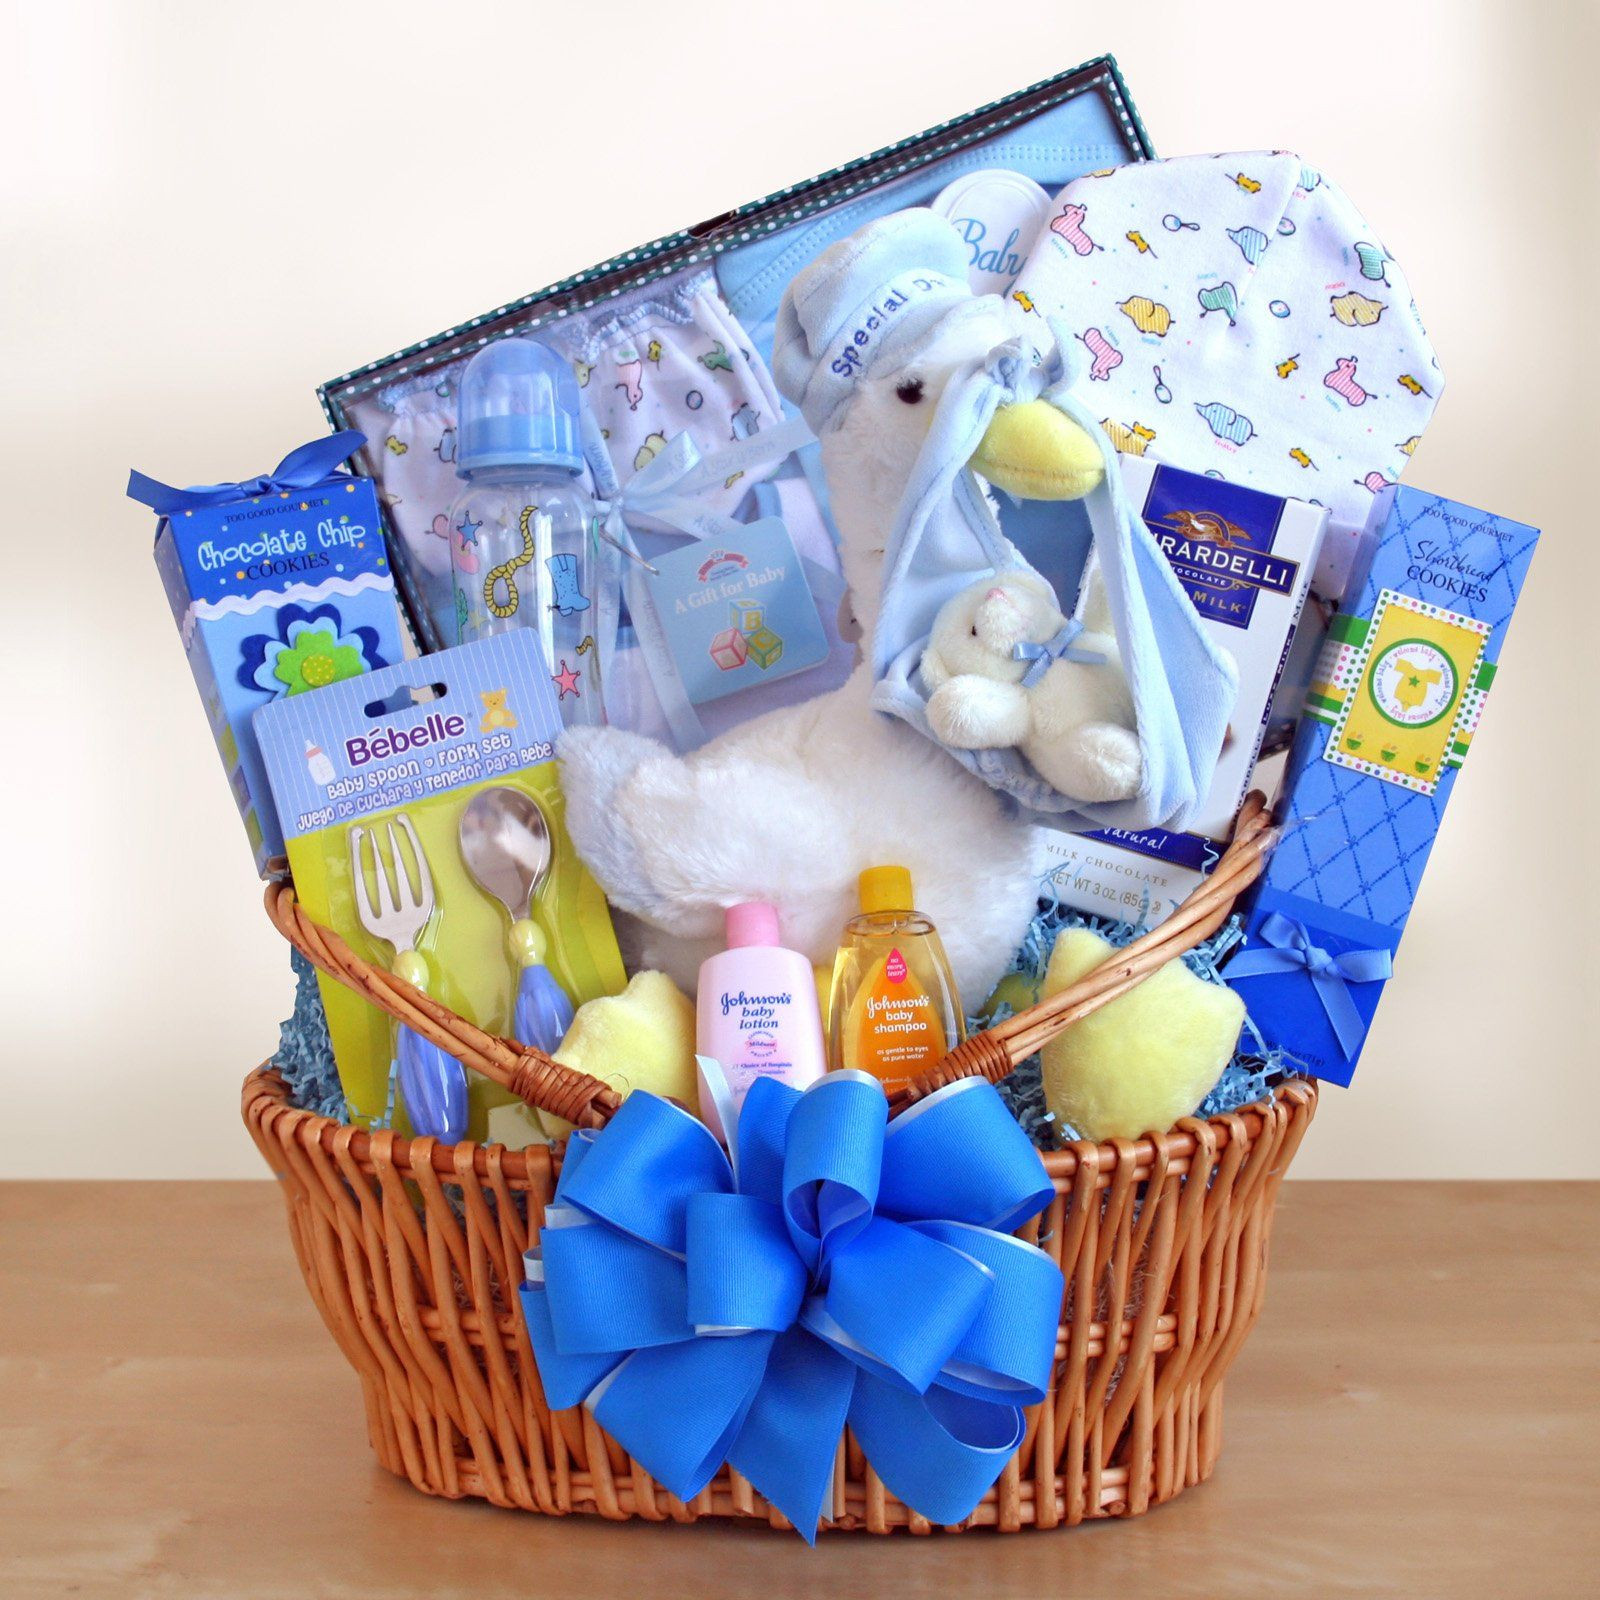 Baby Boy Gift Ideas Pinterest
 Special Stork Delivery Baby Boy Gift Basket